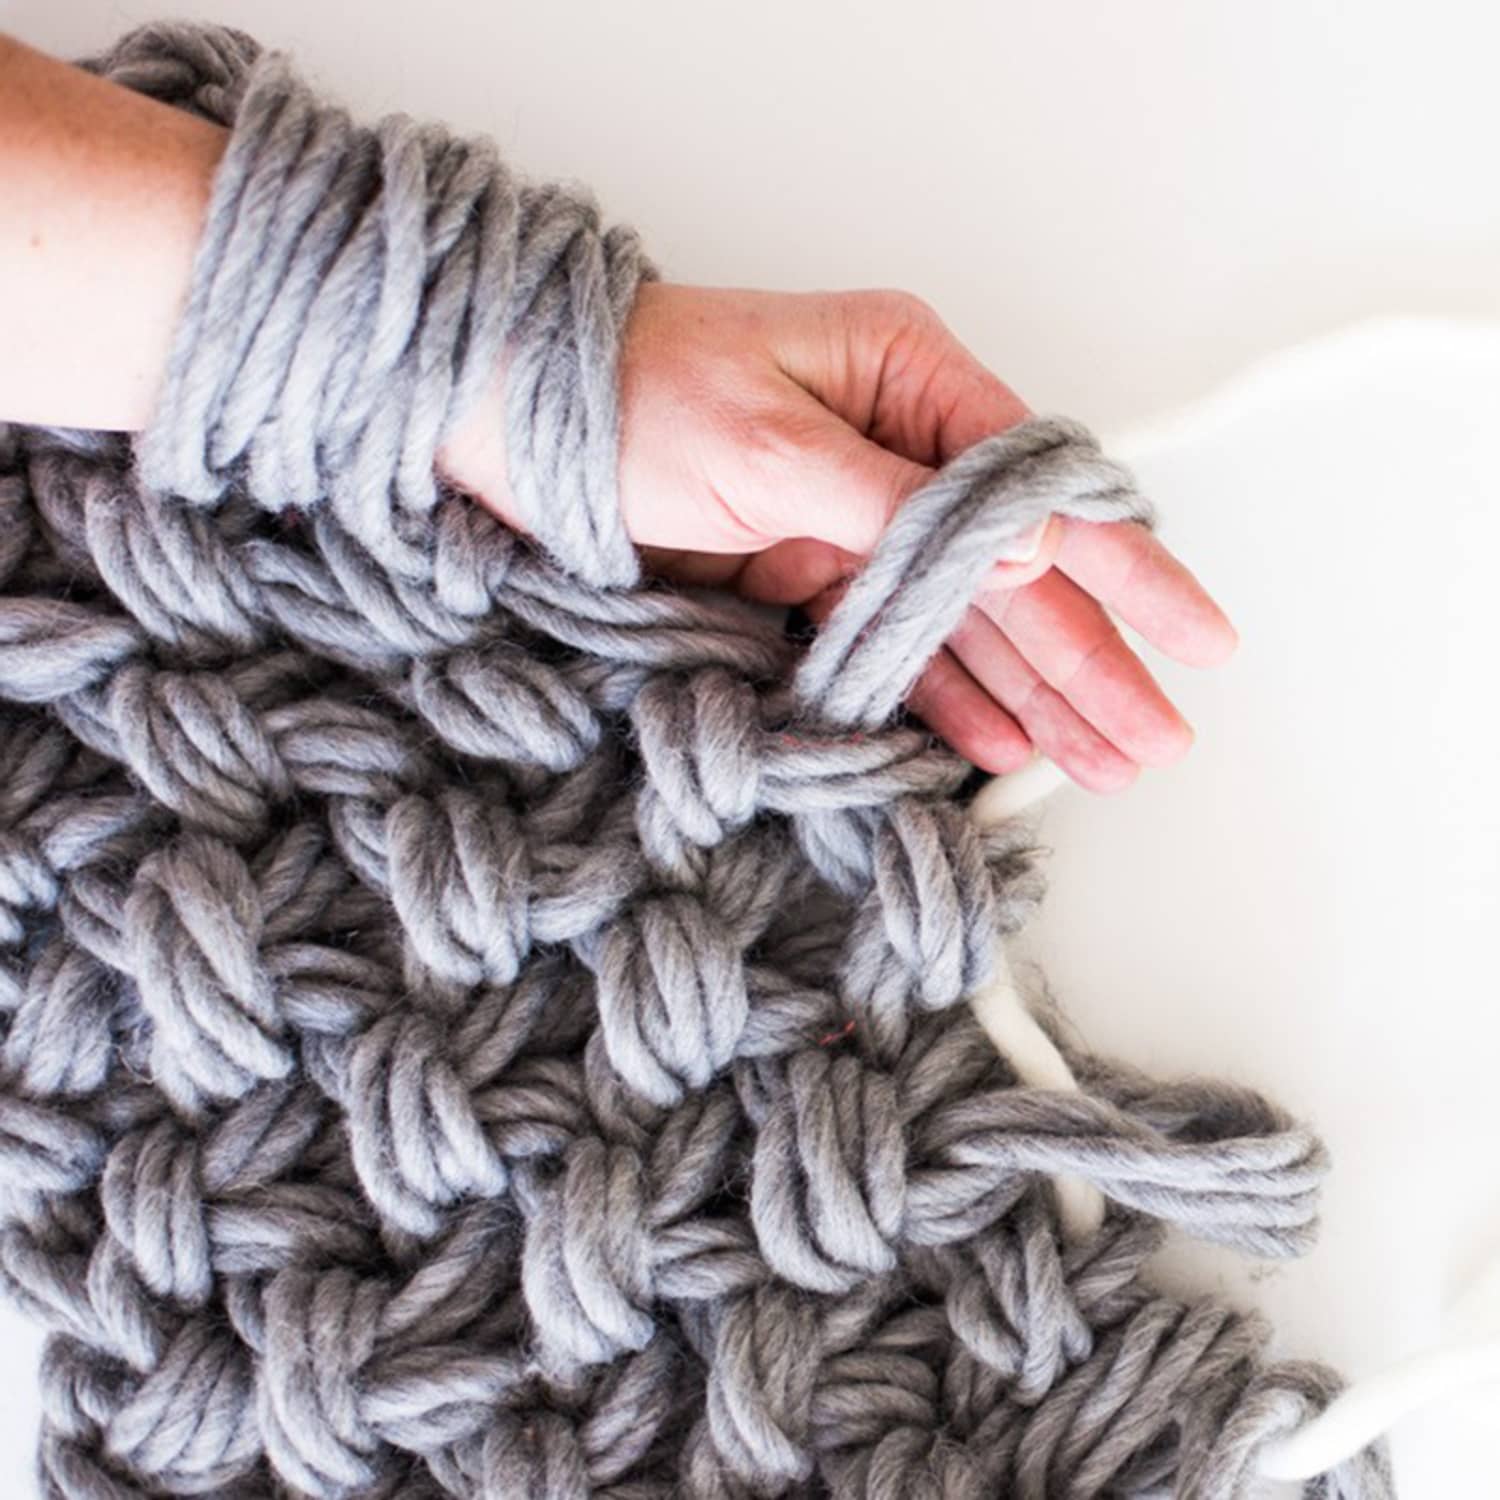 Arm Knitting Made Easy: A Complete Guide To Knitting For Beginners